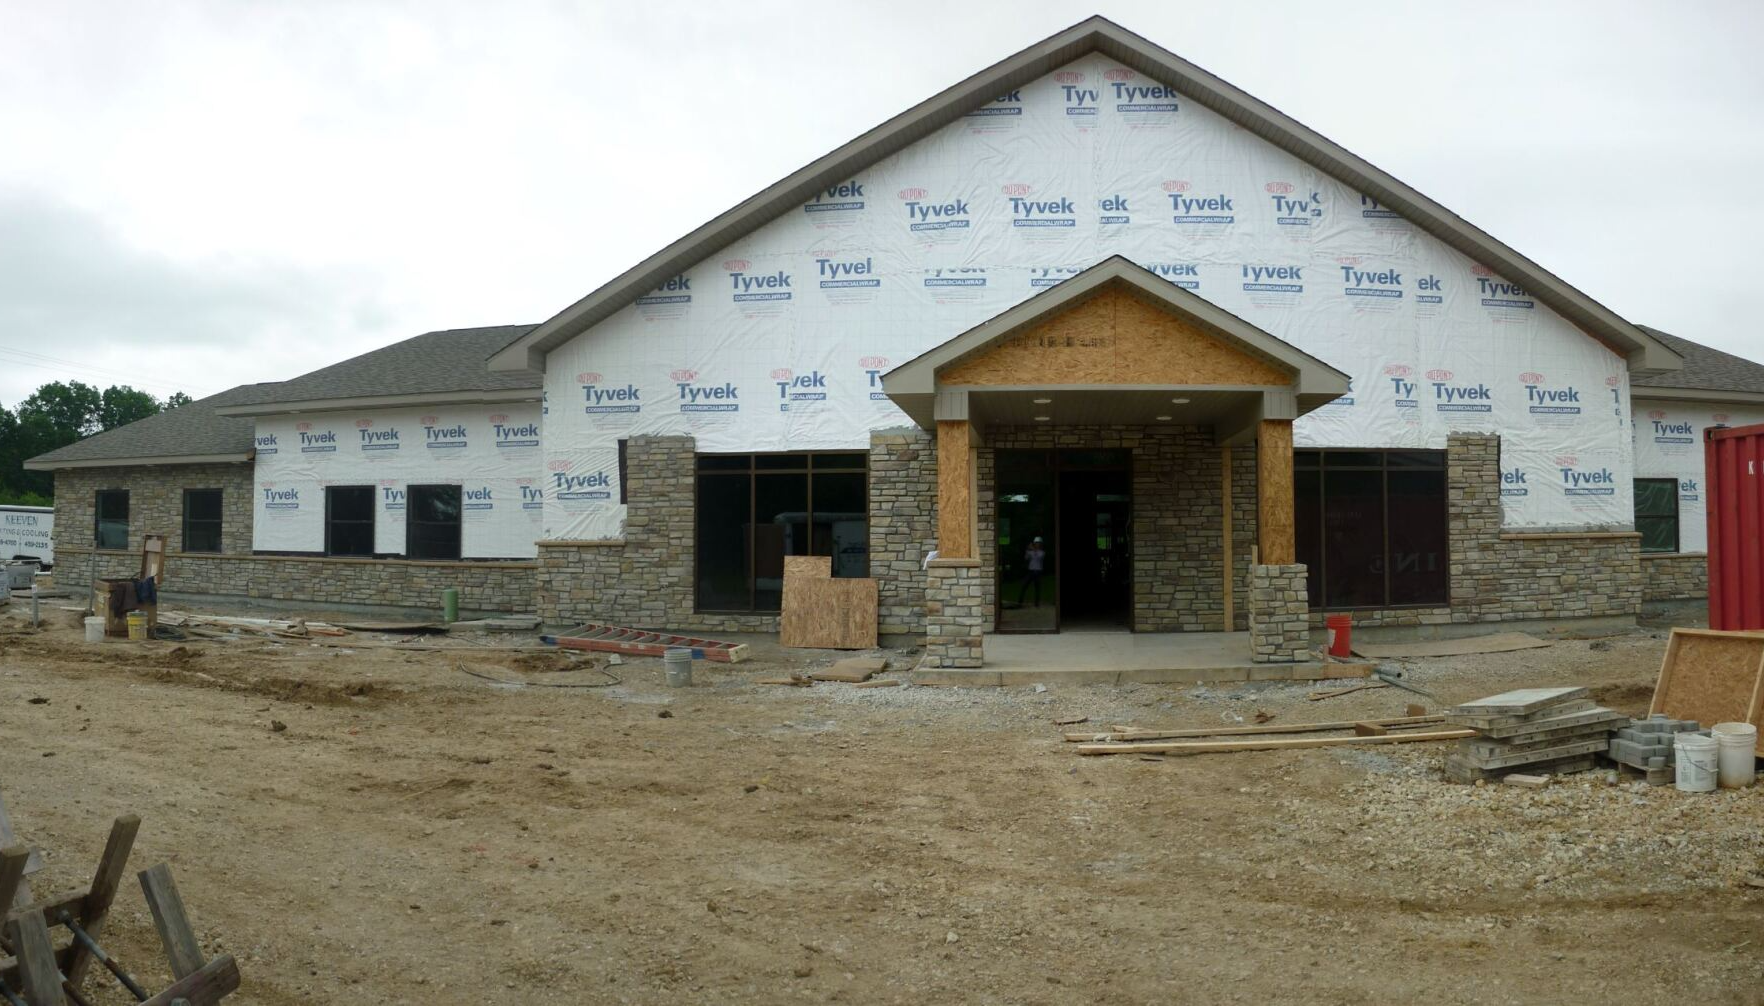 Professional Contractors & Engineers Is Streamlining Commercial Construction With Design Build Services in Mid-Missouri